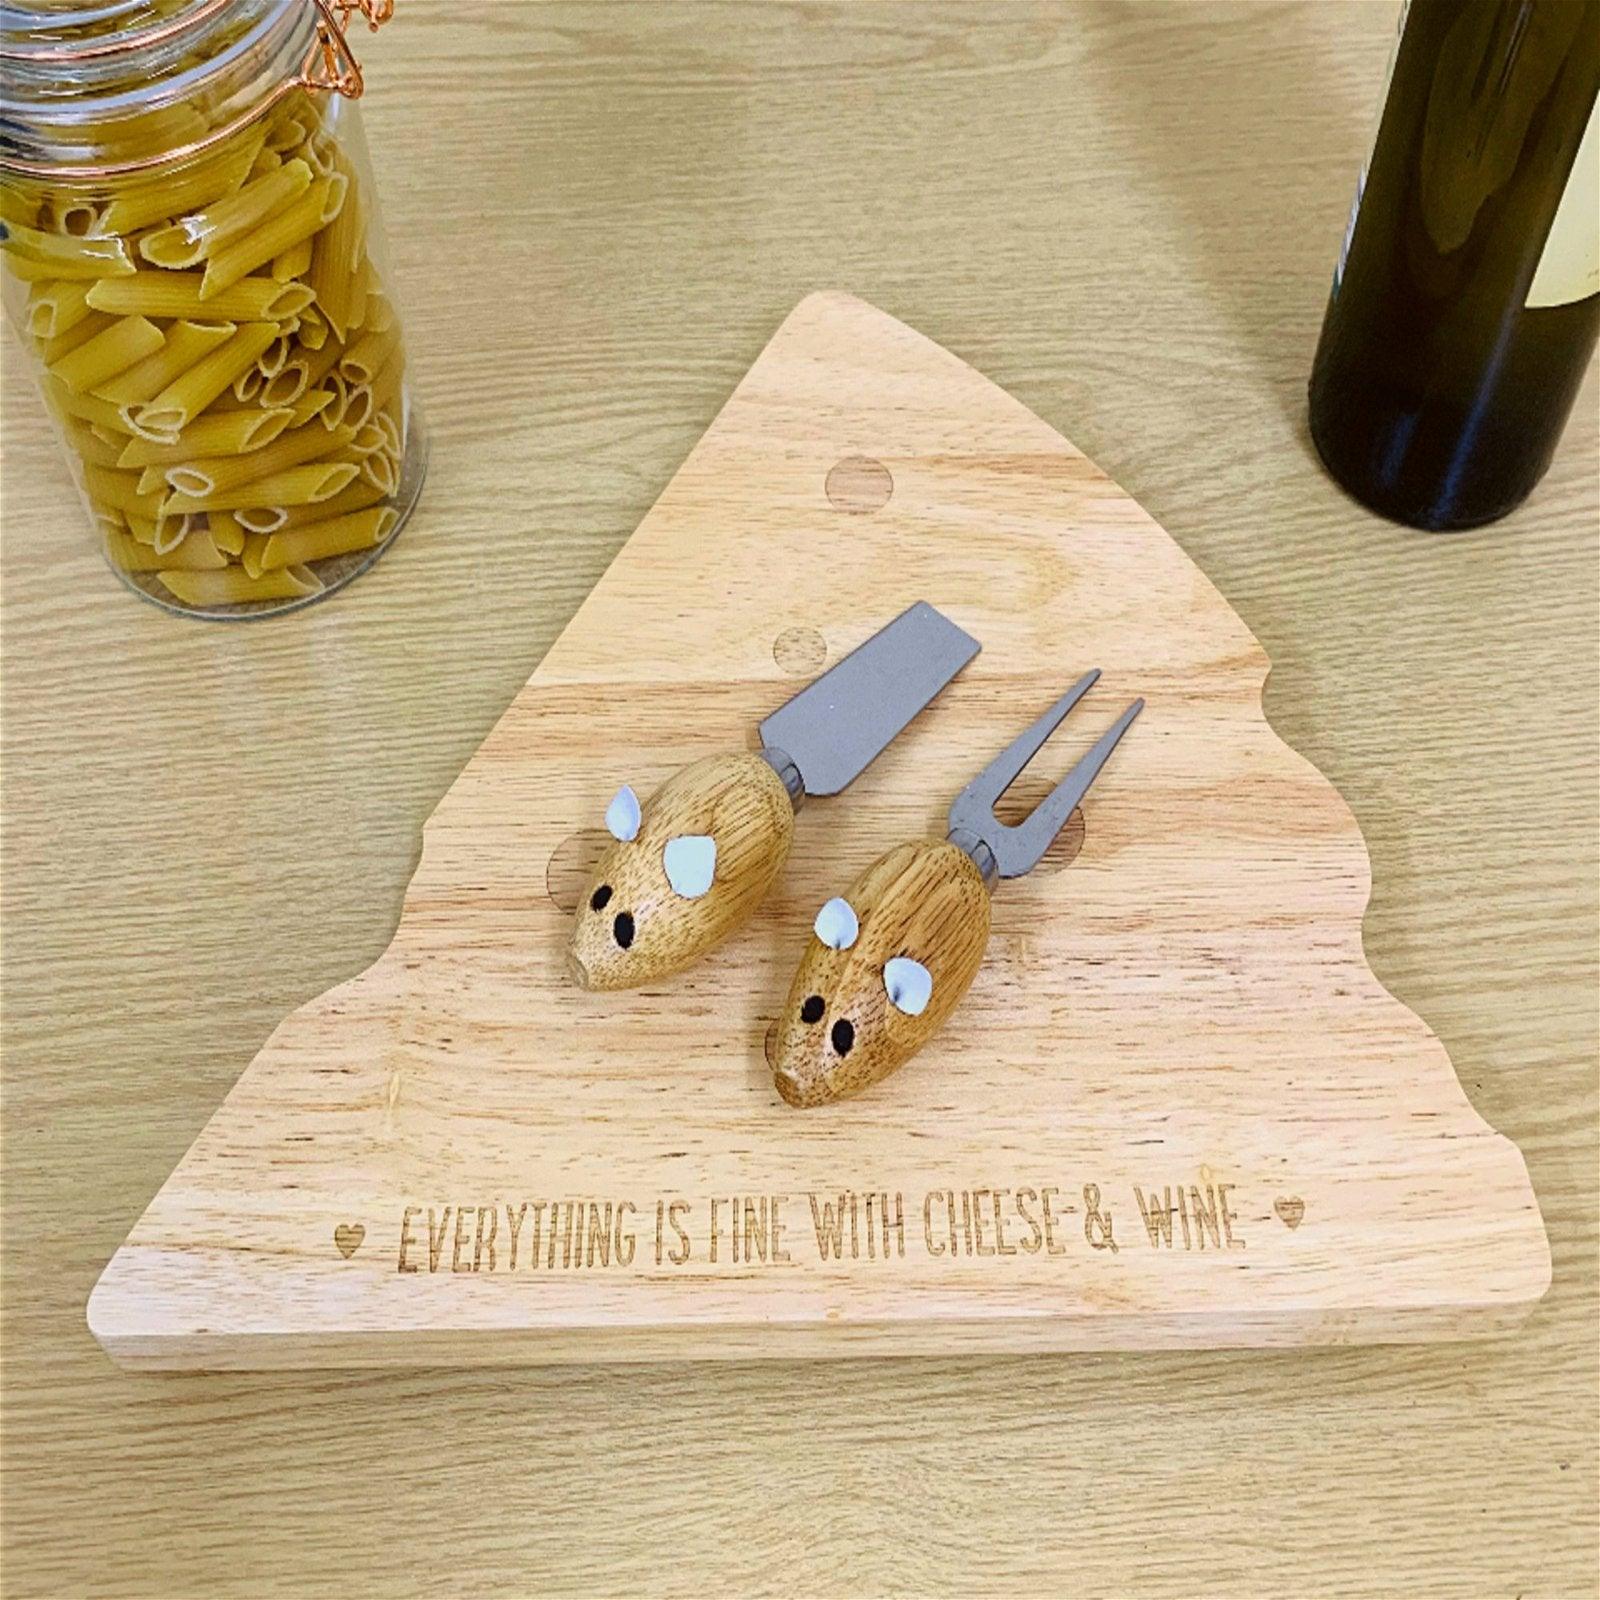 View Cheeseboard Wedge Shape with Mouse Knives information